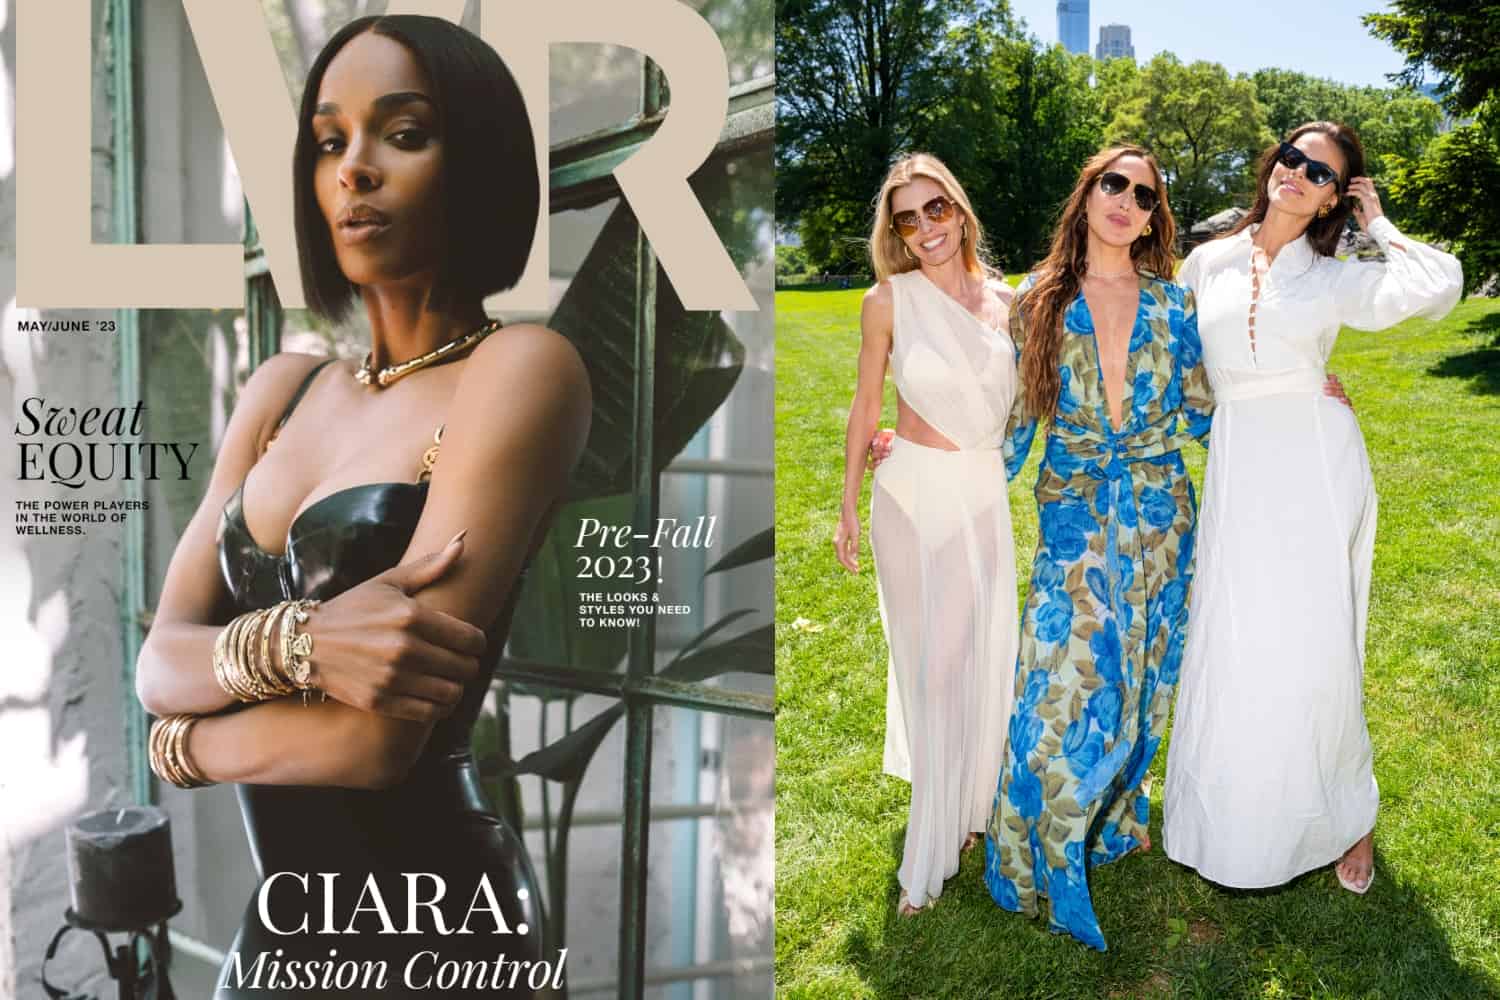 Miami’s CURIO Will Open At Project Hamptons, Ciara Covers LVR Magazine, At The Chateau With D&G